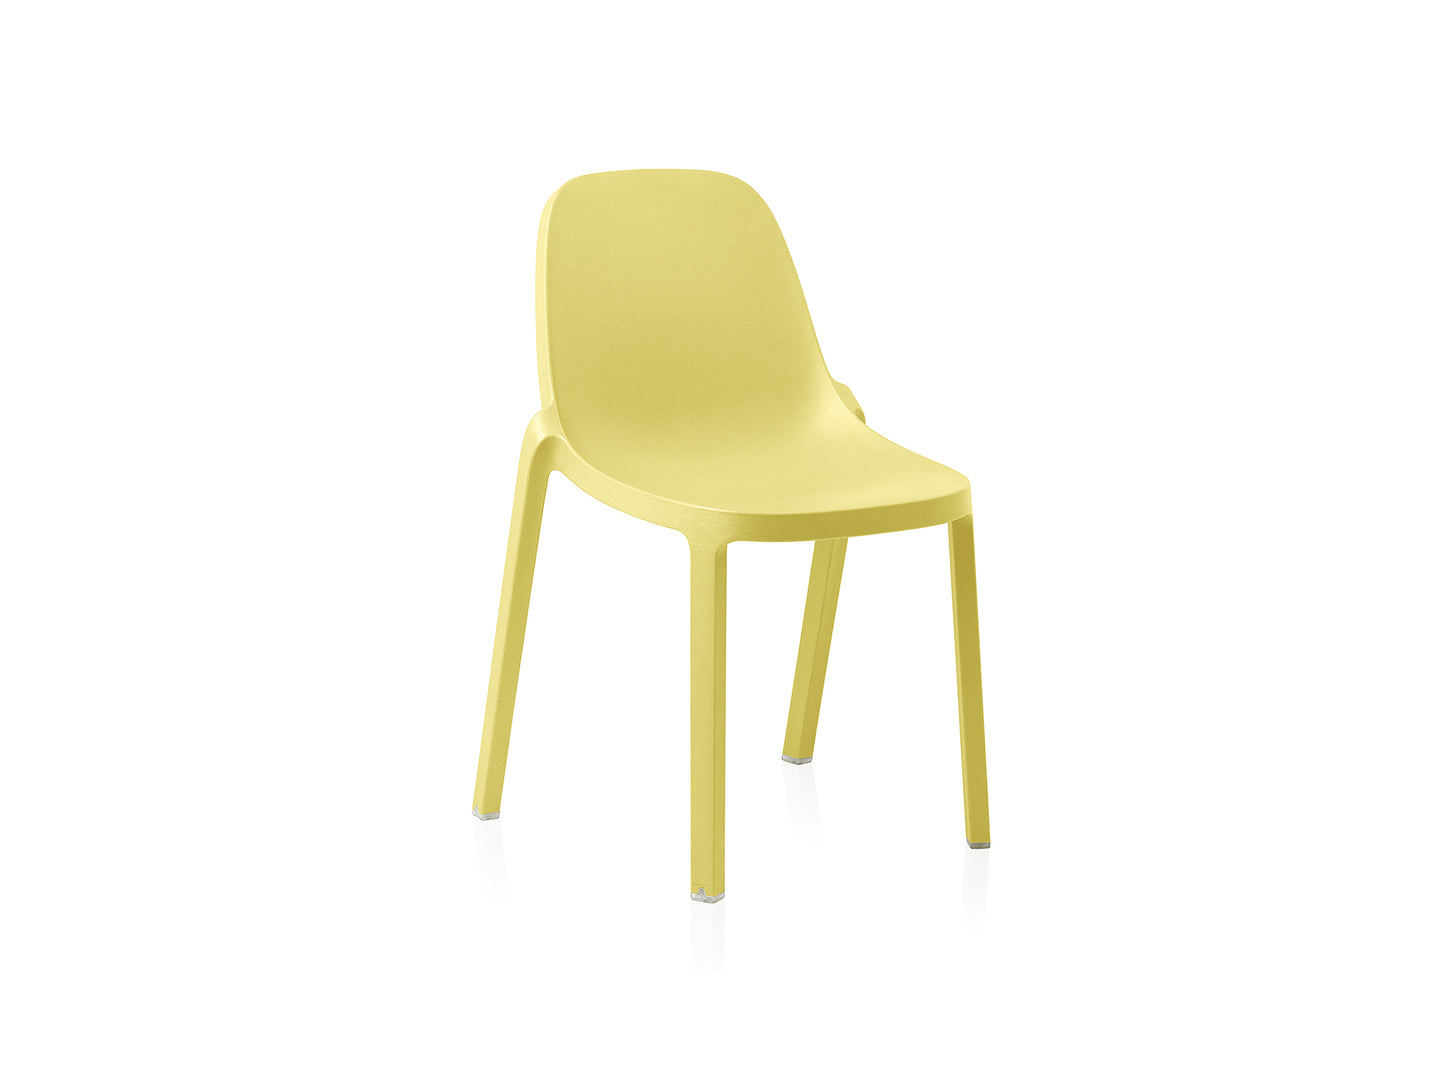 Emeco  Broom Stacking Chair - Butter Yellow